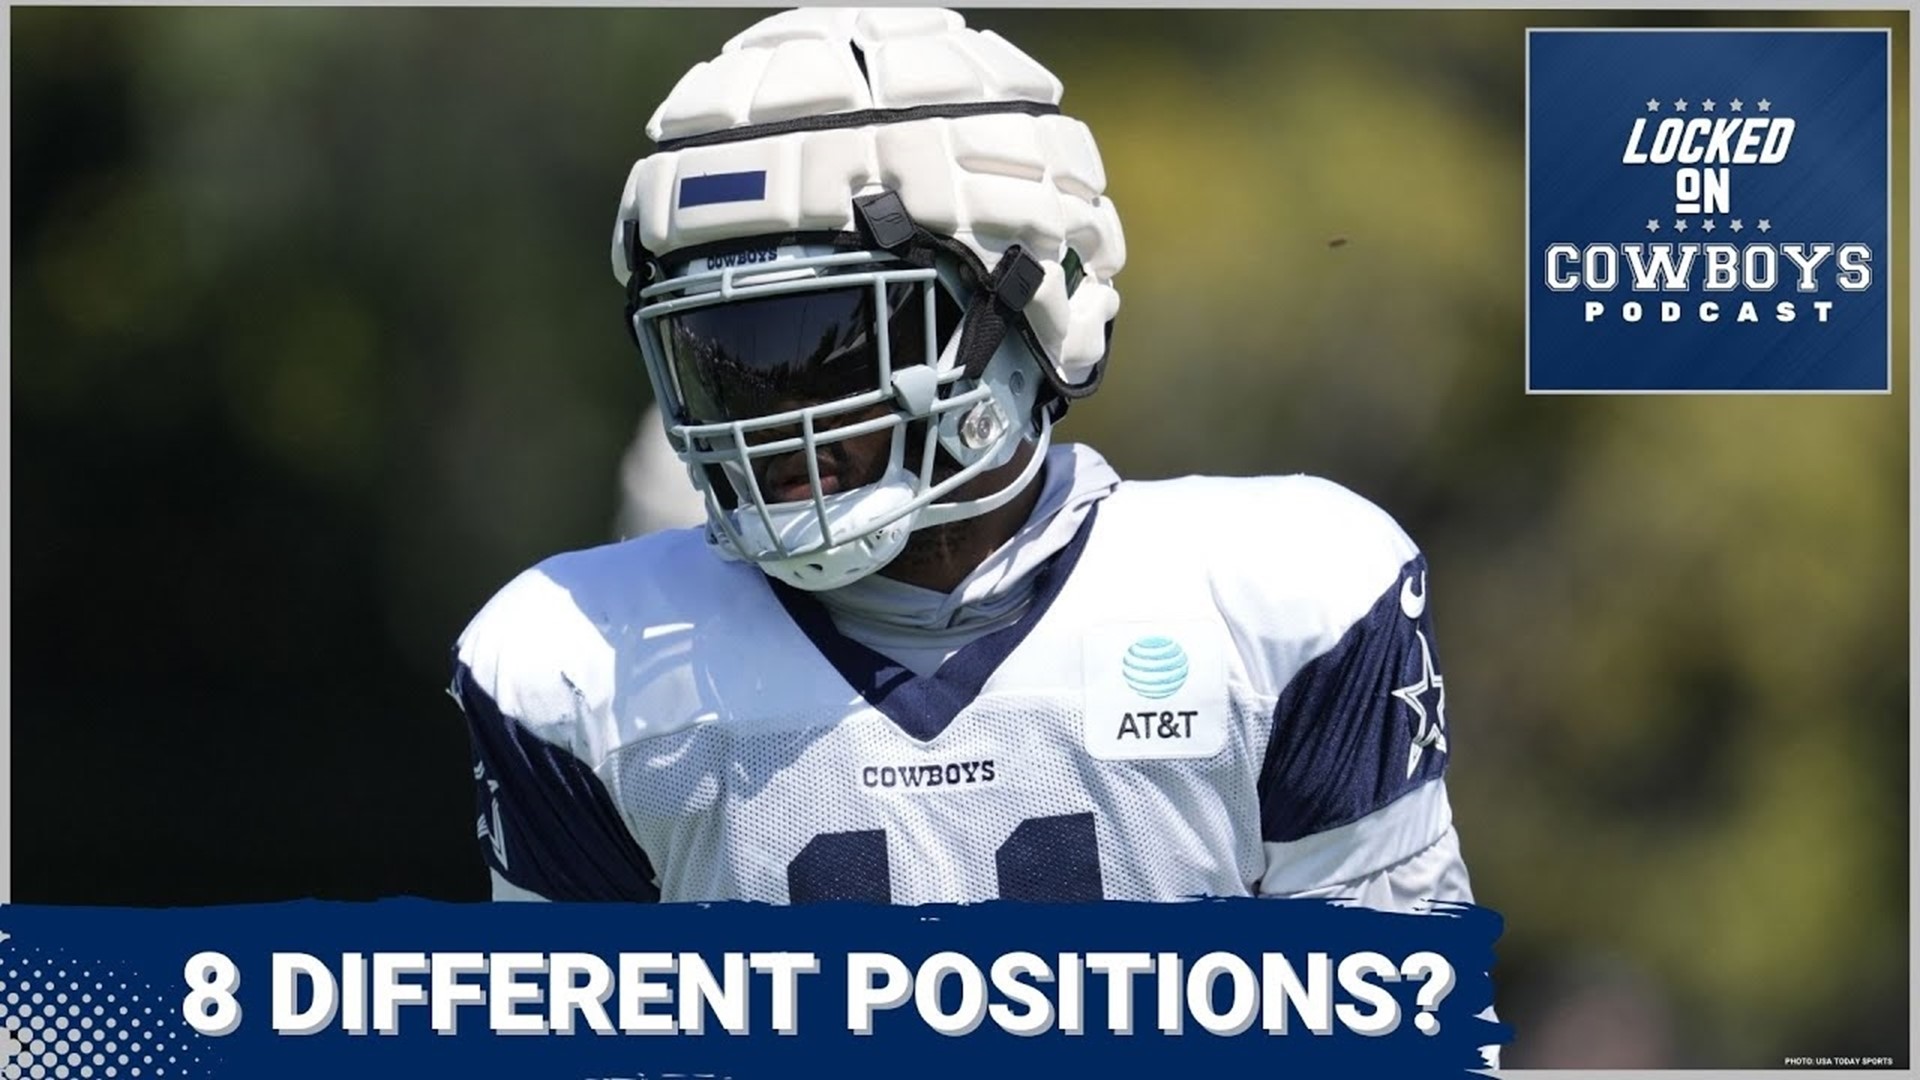 Marcus Mosher and Landon McCool discuss the latest news and nuggets from Week 2 of OTA practice for the Dallas Cowboys.